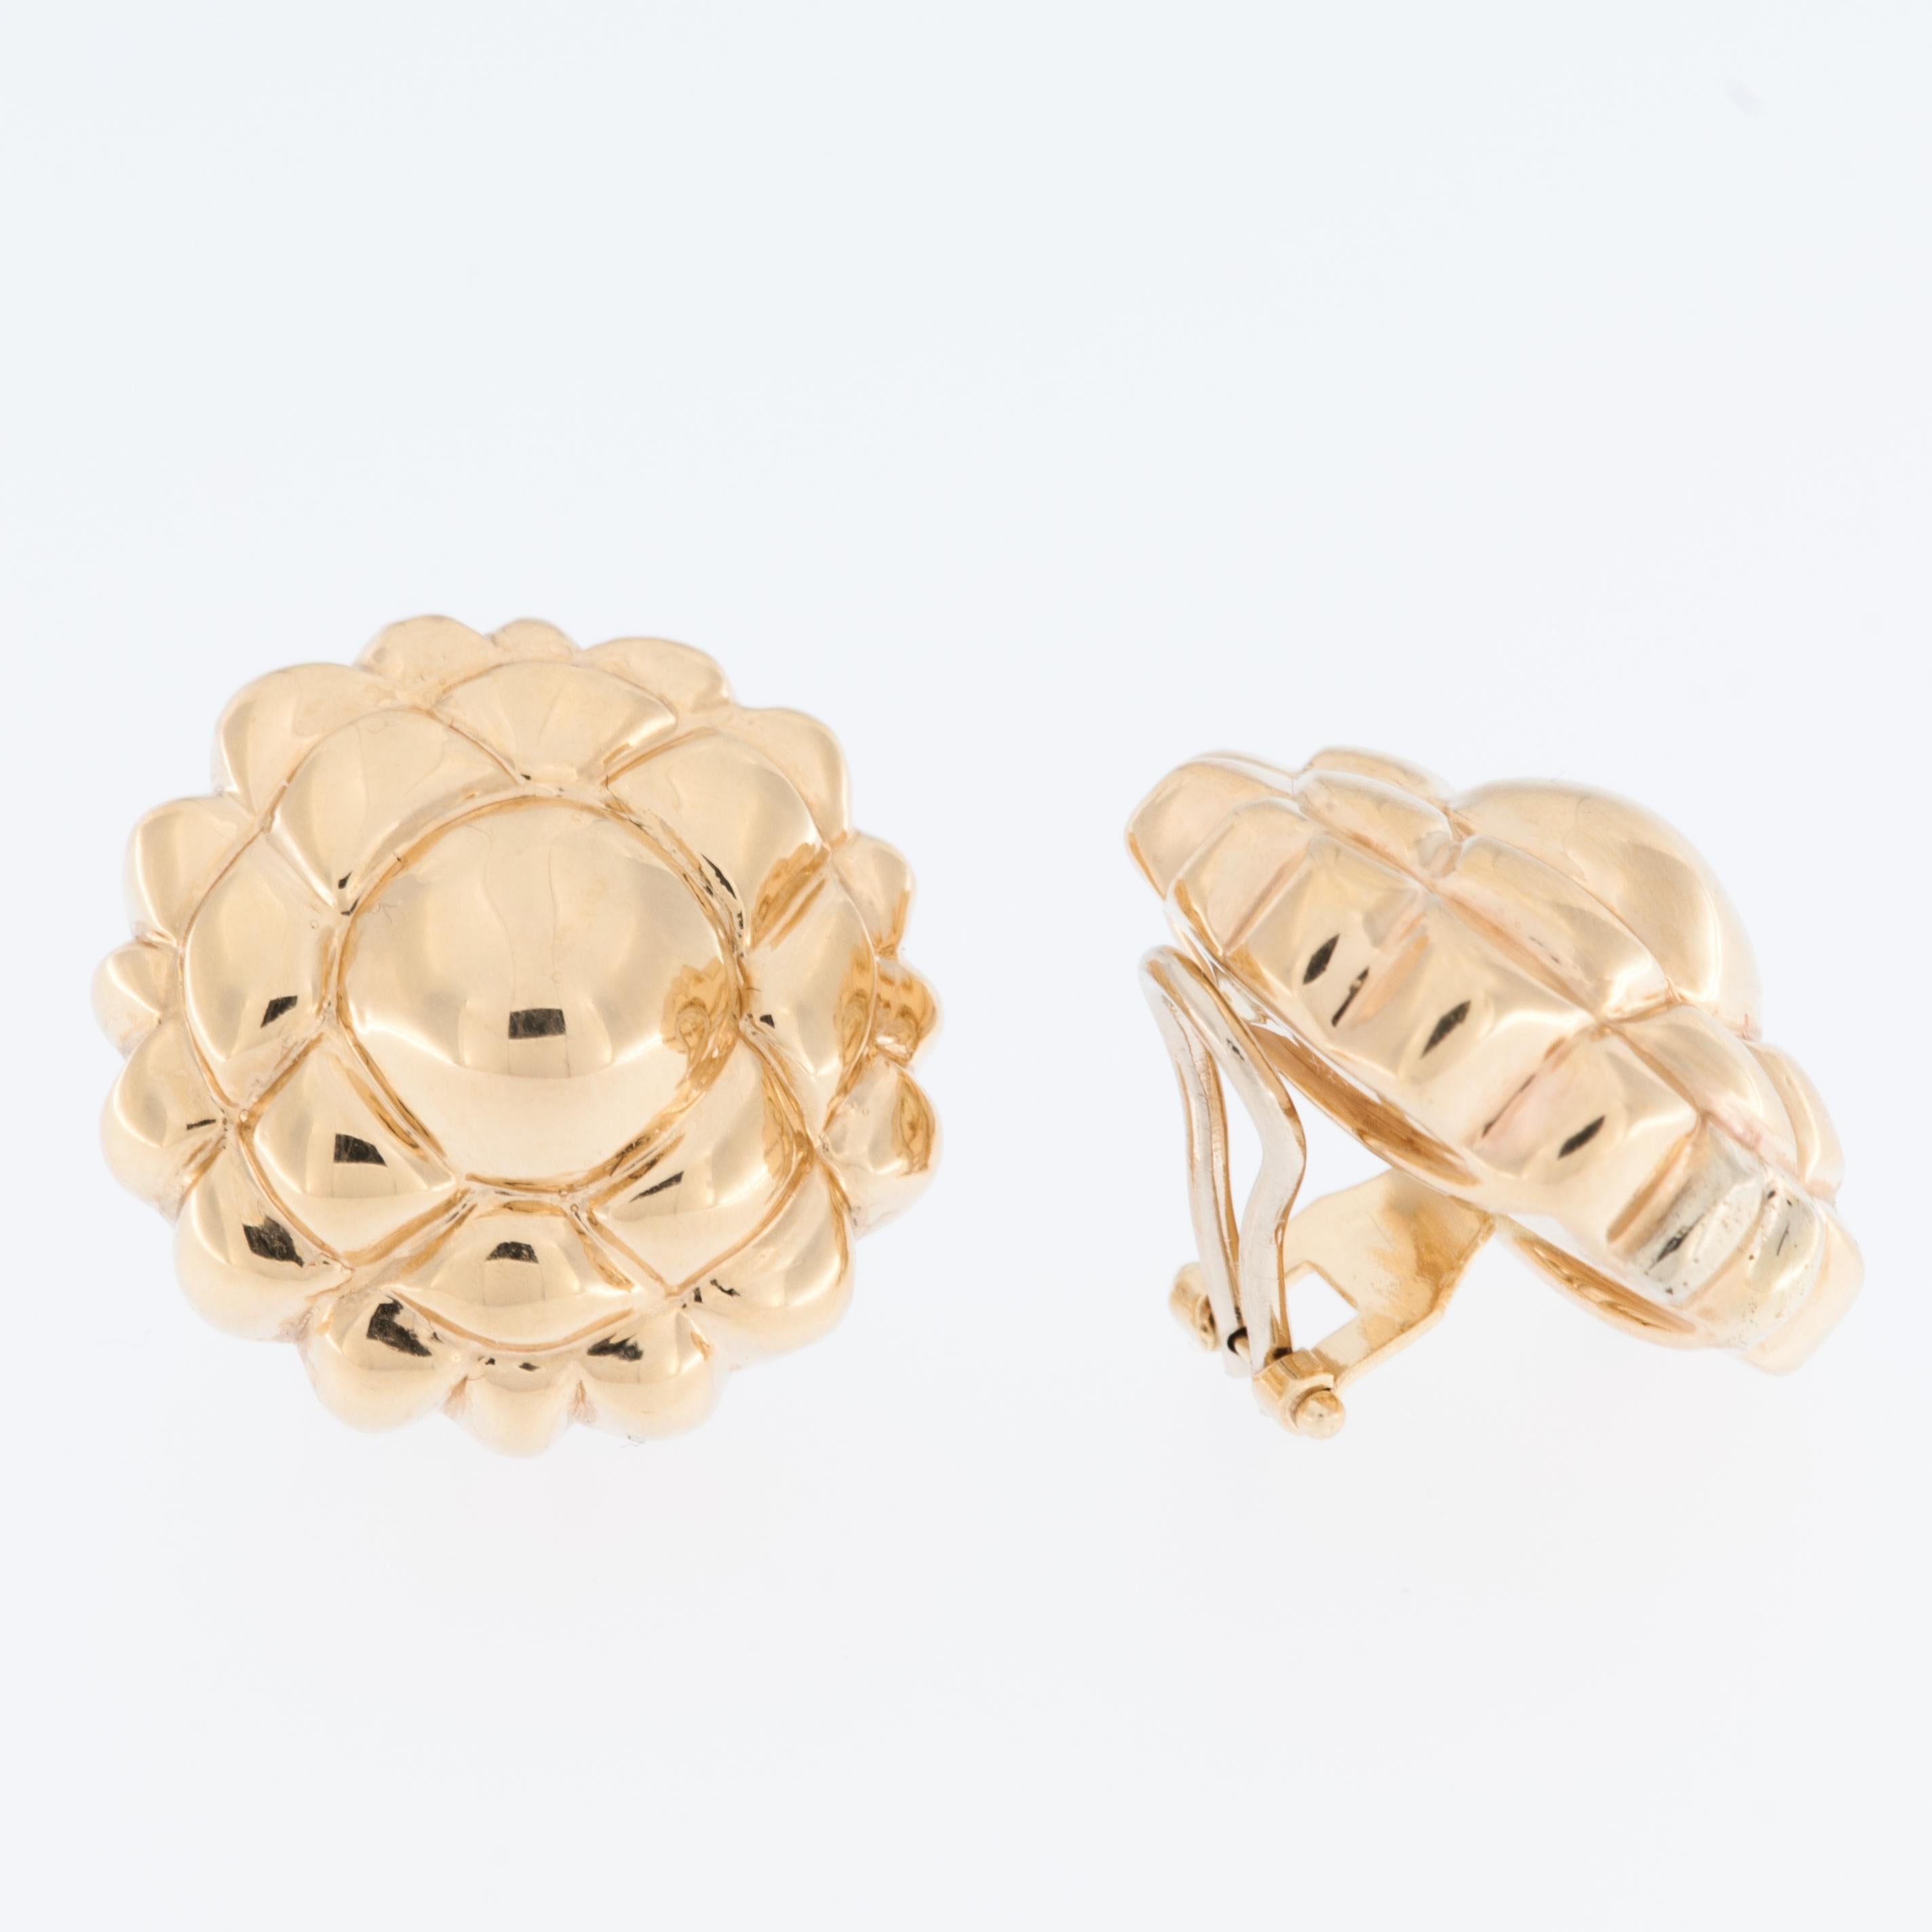 The Italian Earrings Sunflower Design Yellow Gold are a radiant and elegant accessory that captures the essence of nature's beauty. Crafted with precision and artistry in Italy, these earrings are a testament to Italian craftsmanship and style.

The